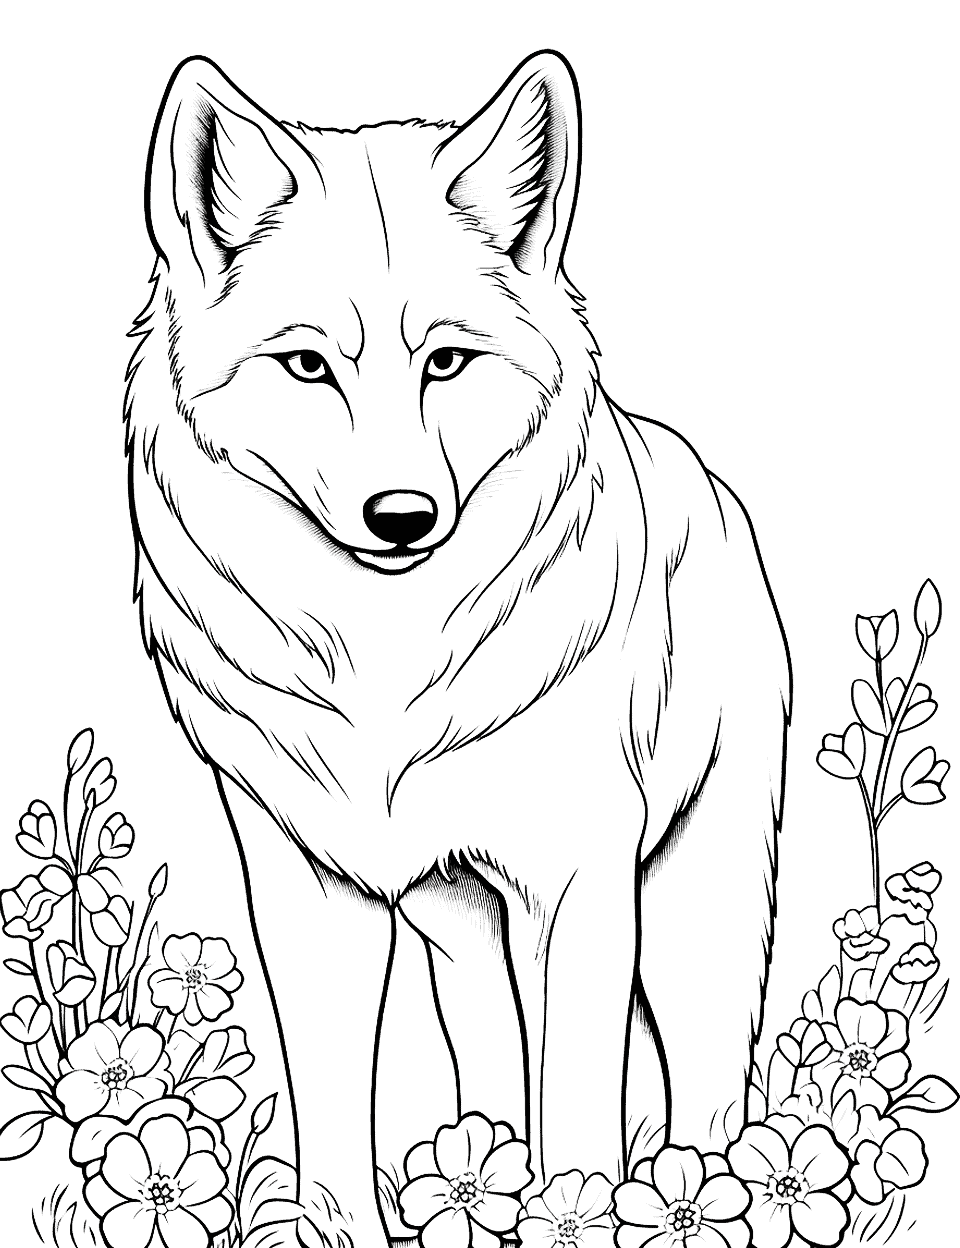 Wolf's Garden Wolf Coloring Page - A wolf surrounded by a garden of blooming flowers.